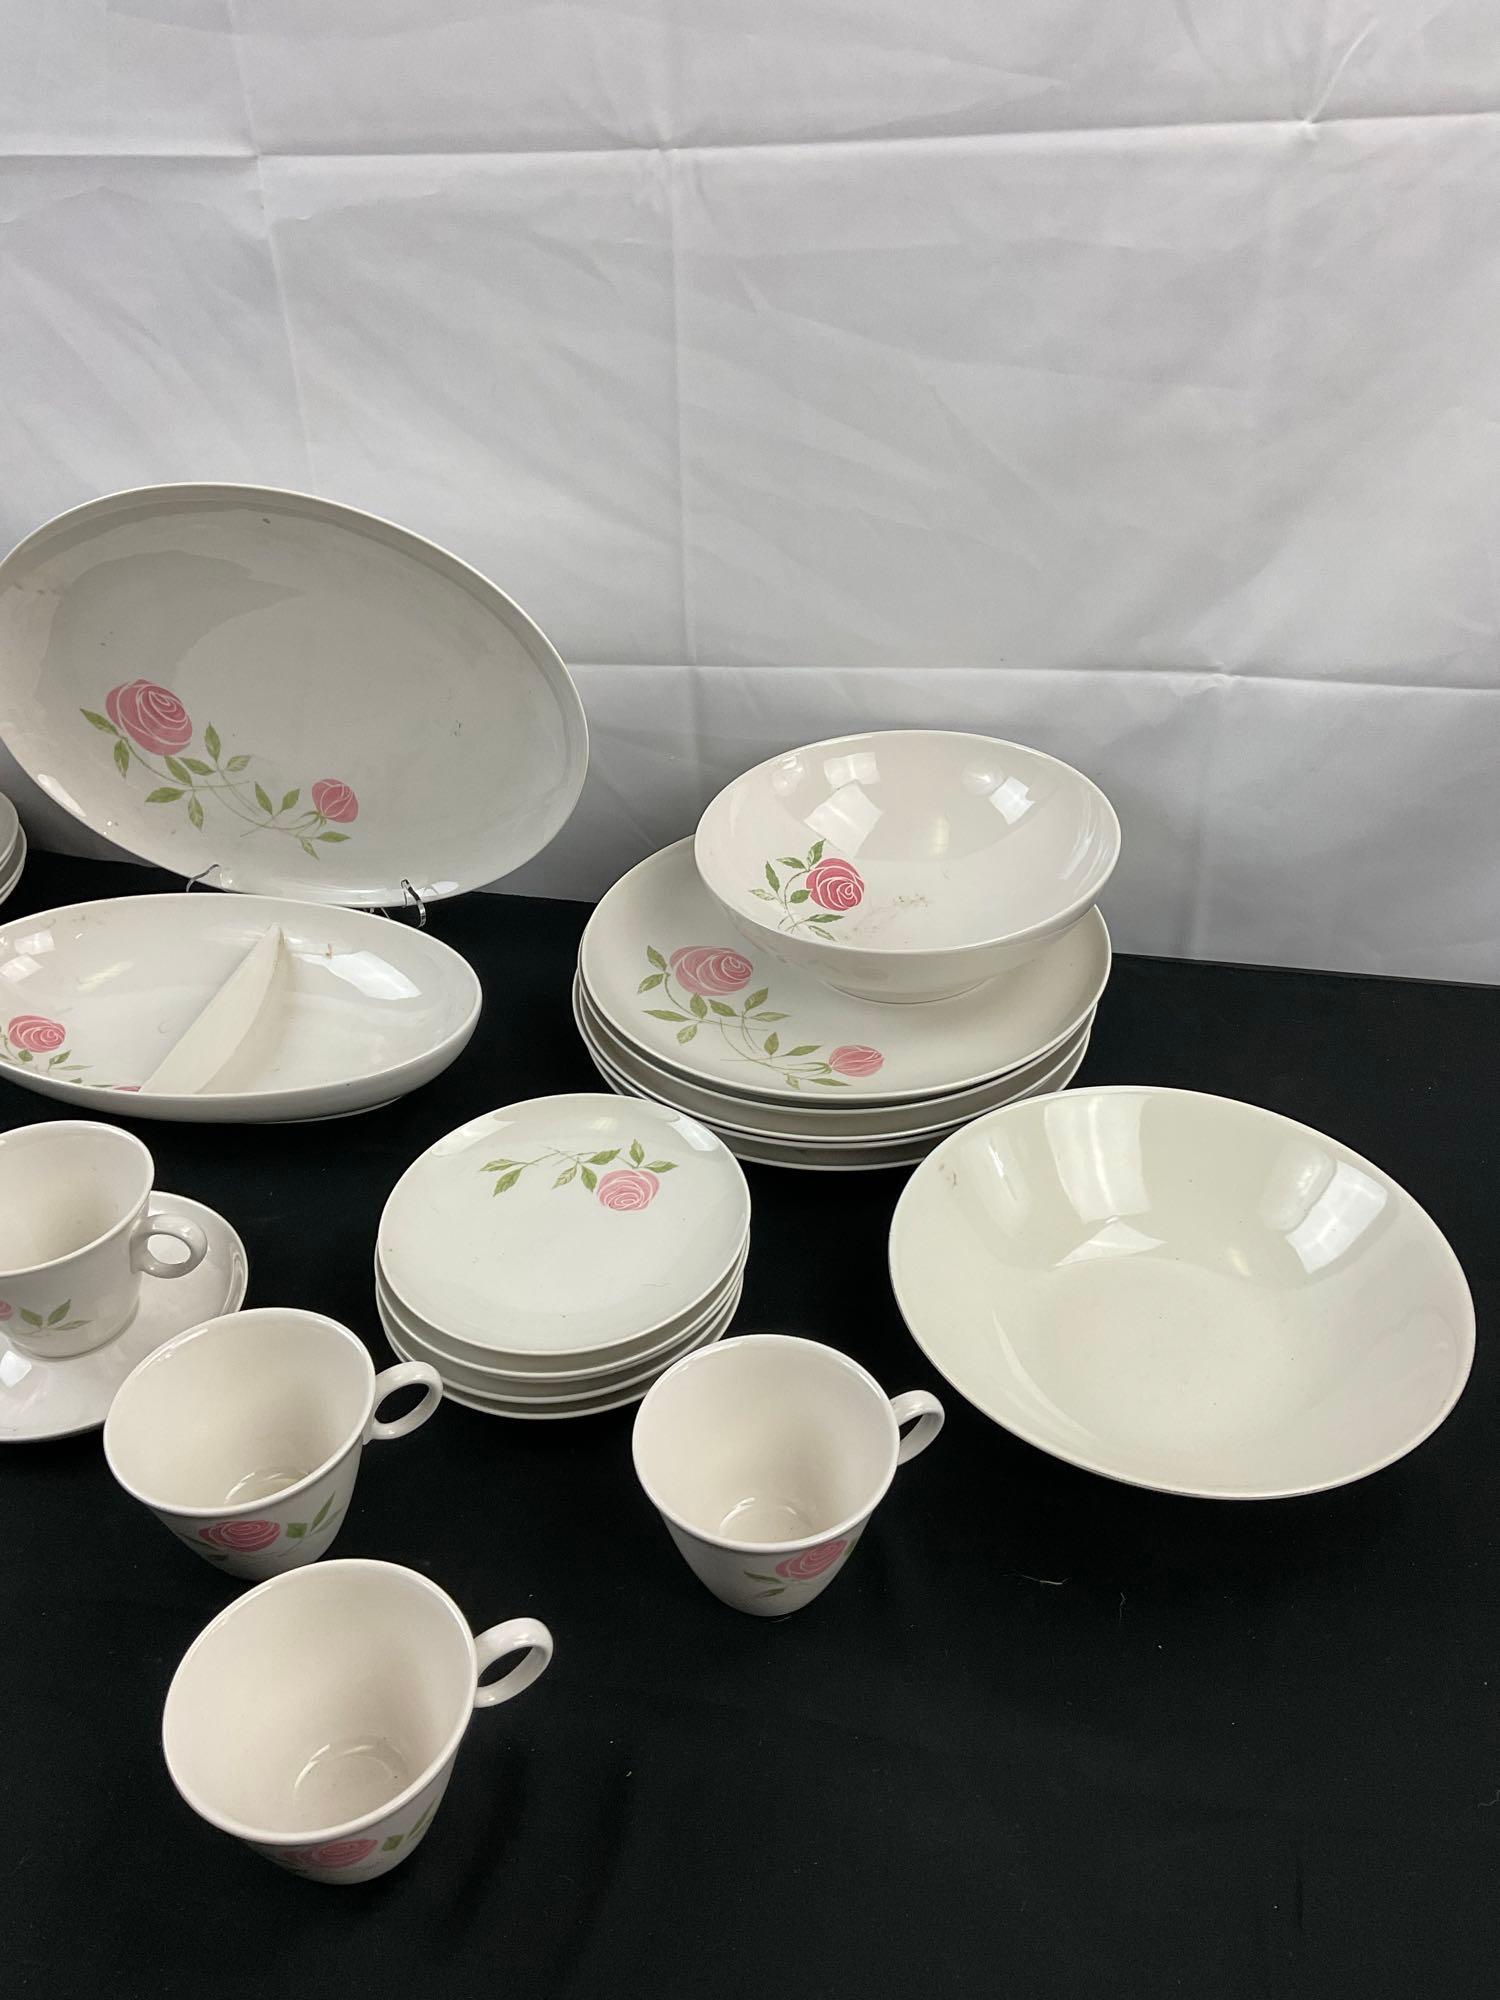 30 pcs Vintage Franciscan Whitestone Ware Tea Set in Pink-a-Dilly Pattern. 1 Substituted Plate. See